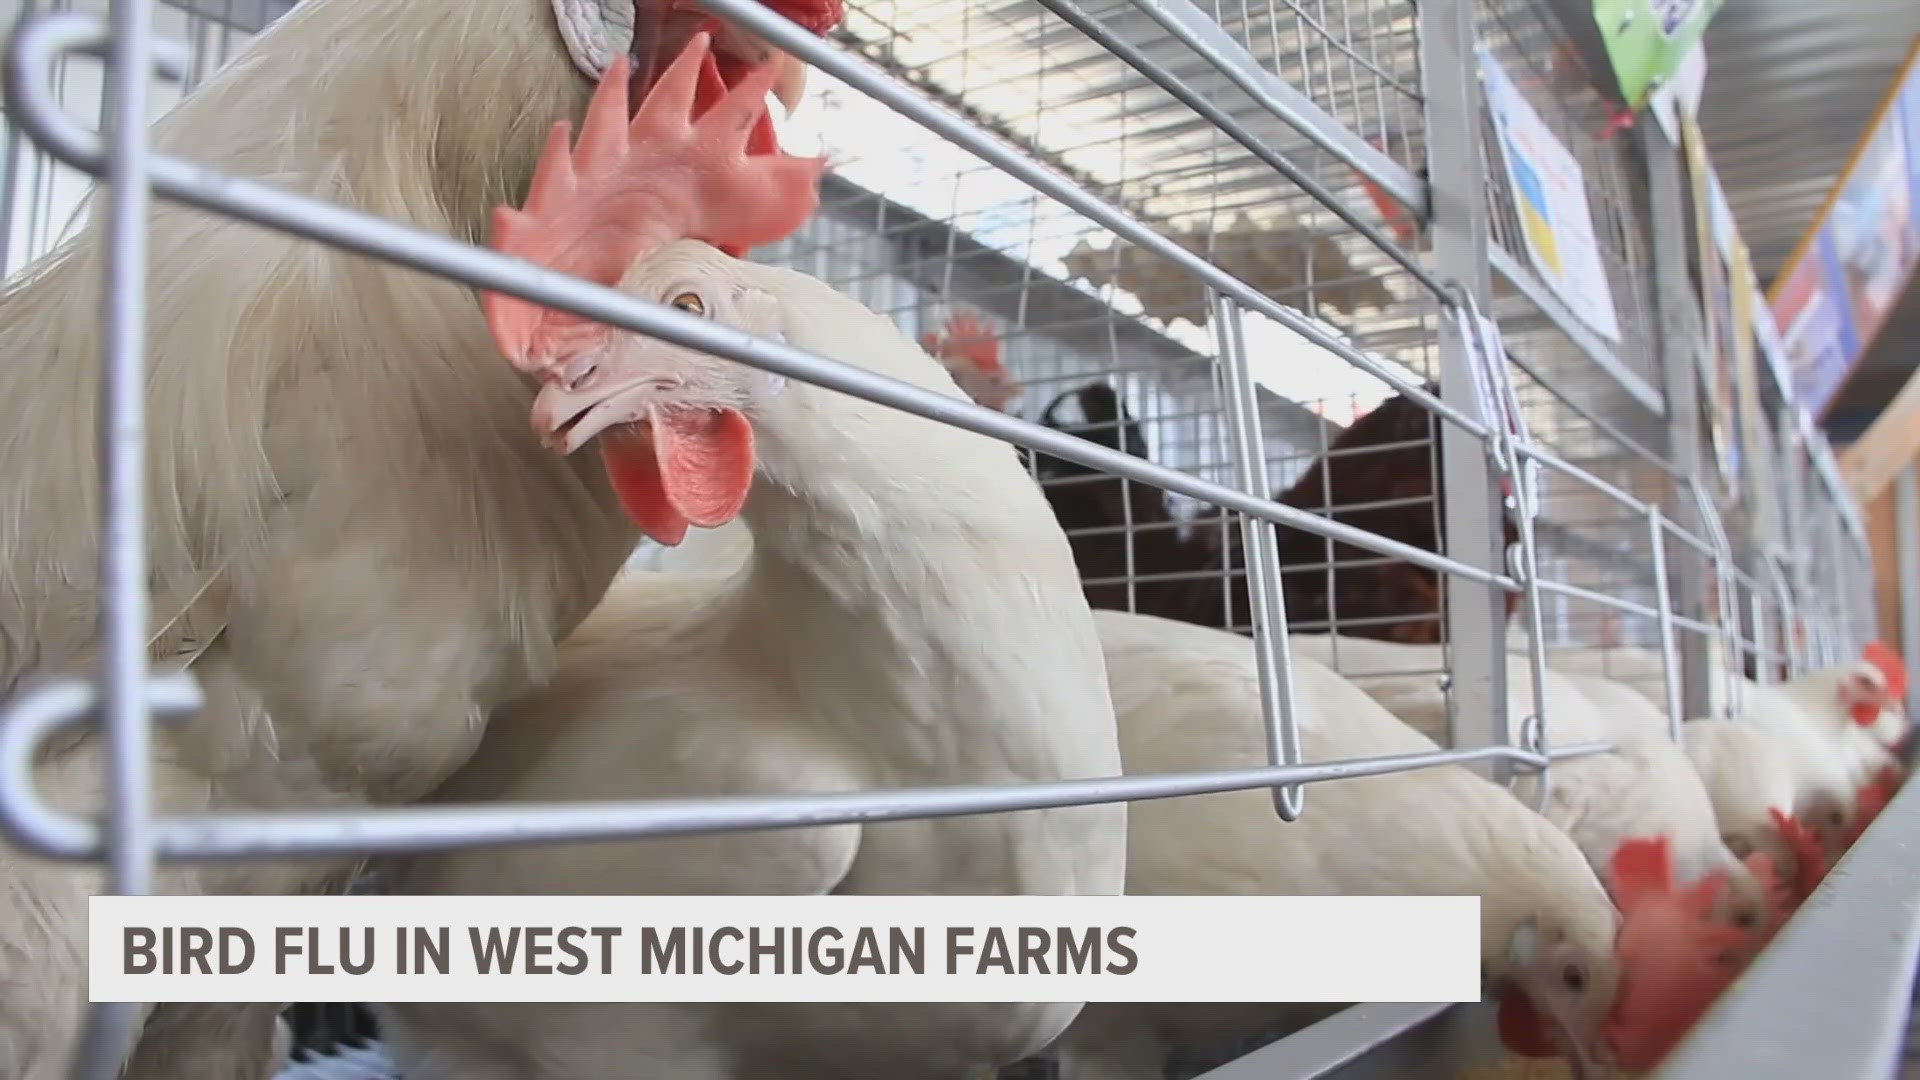 The Michigan Department of Agriculture and Rural Development shares steps to protect farmer's flocks.